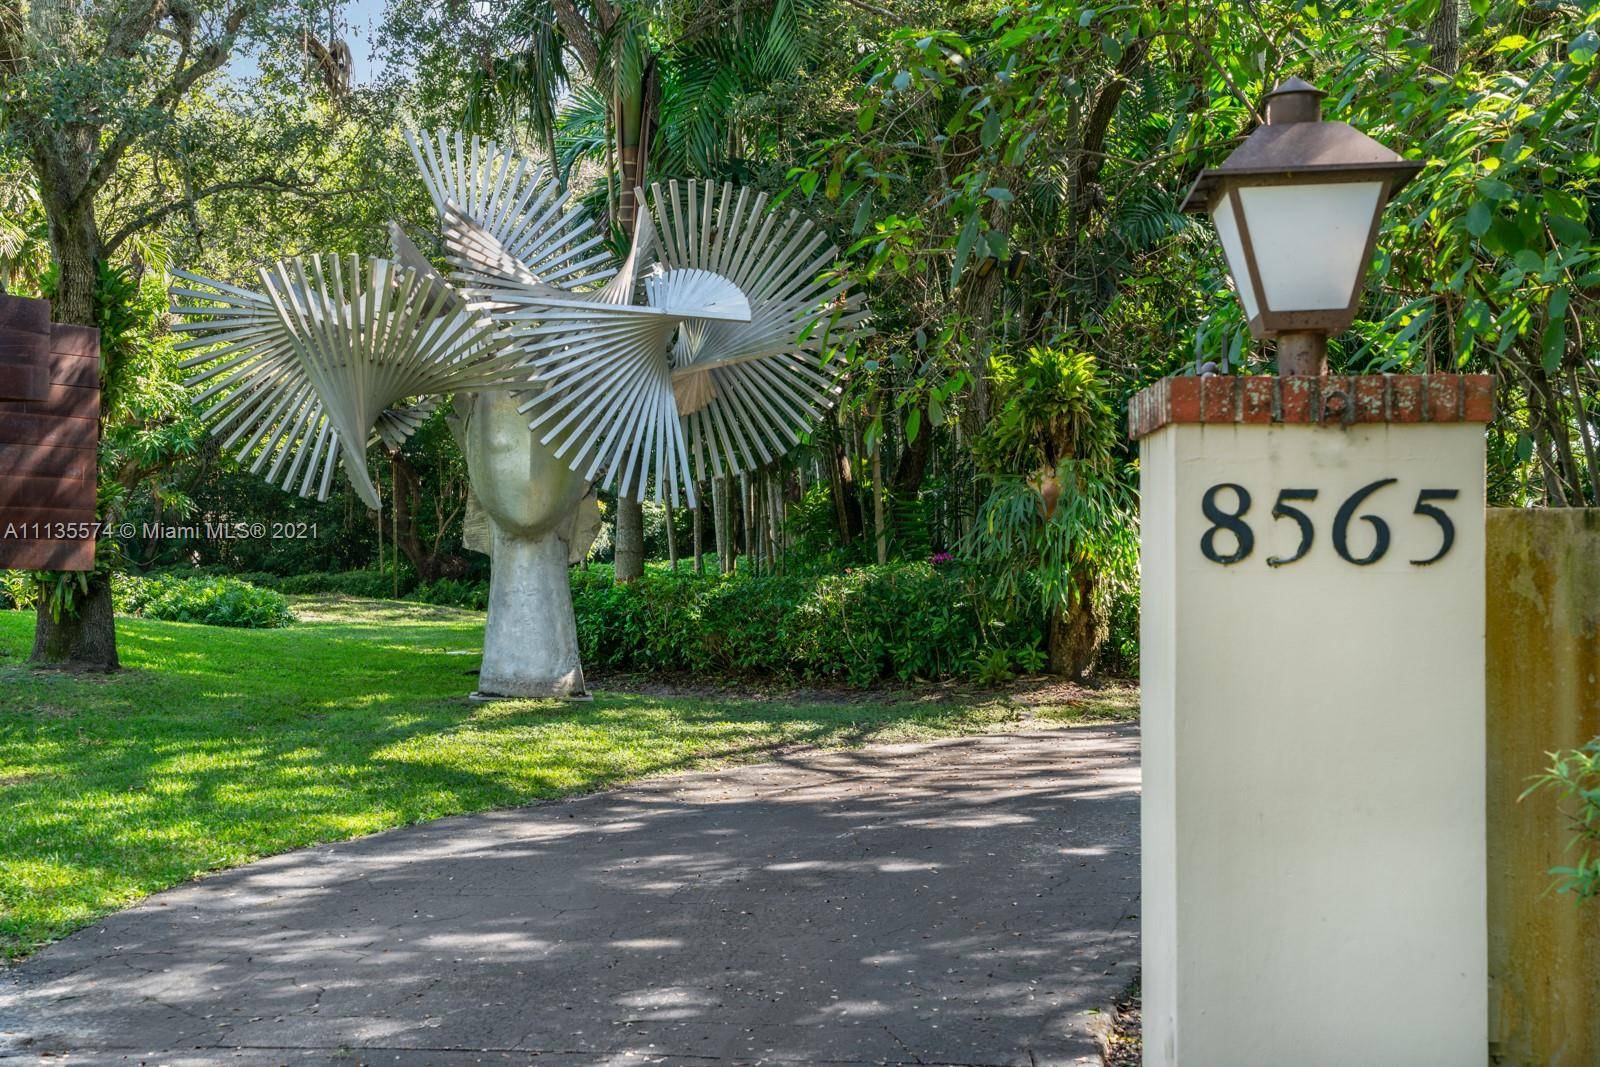 A once in a lifetime opportunity to own the 2nd largest parcel in all of Gables Estates.